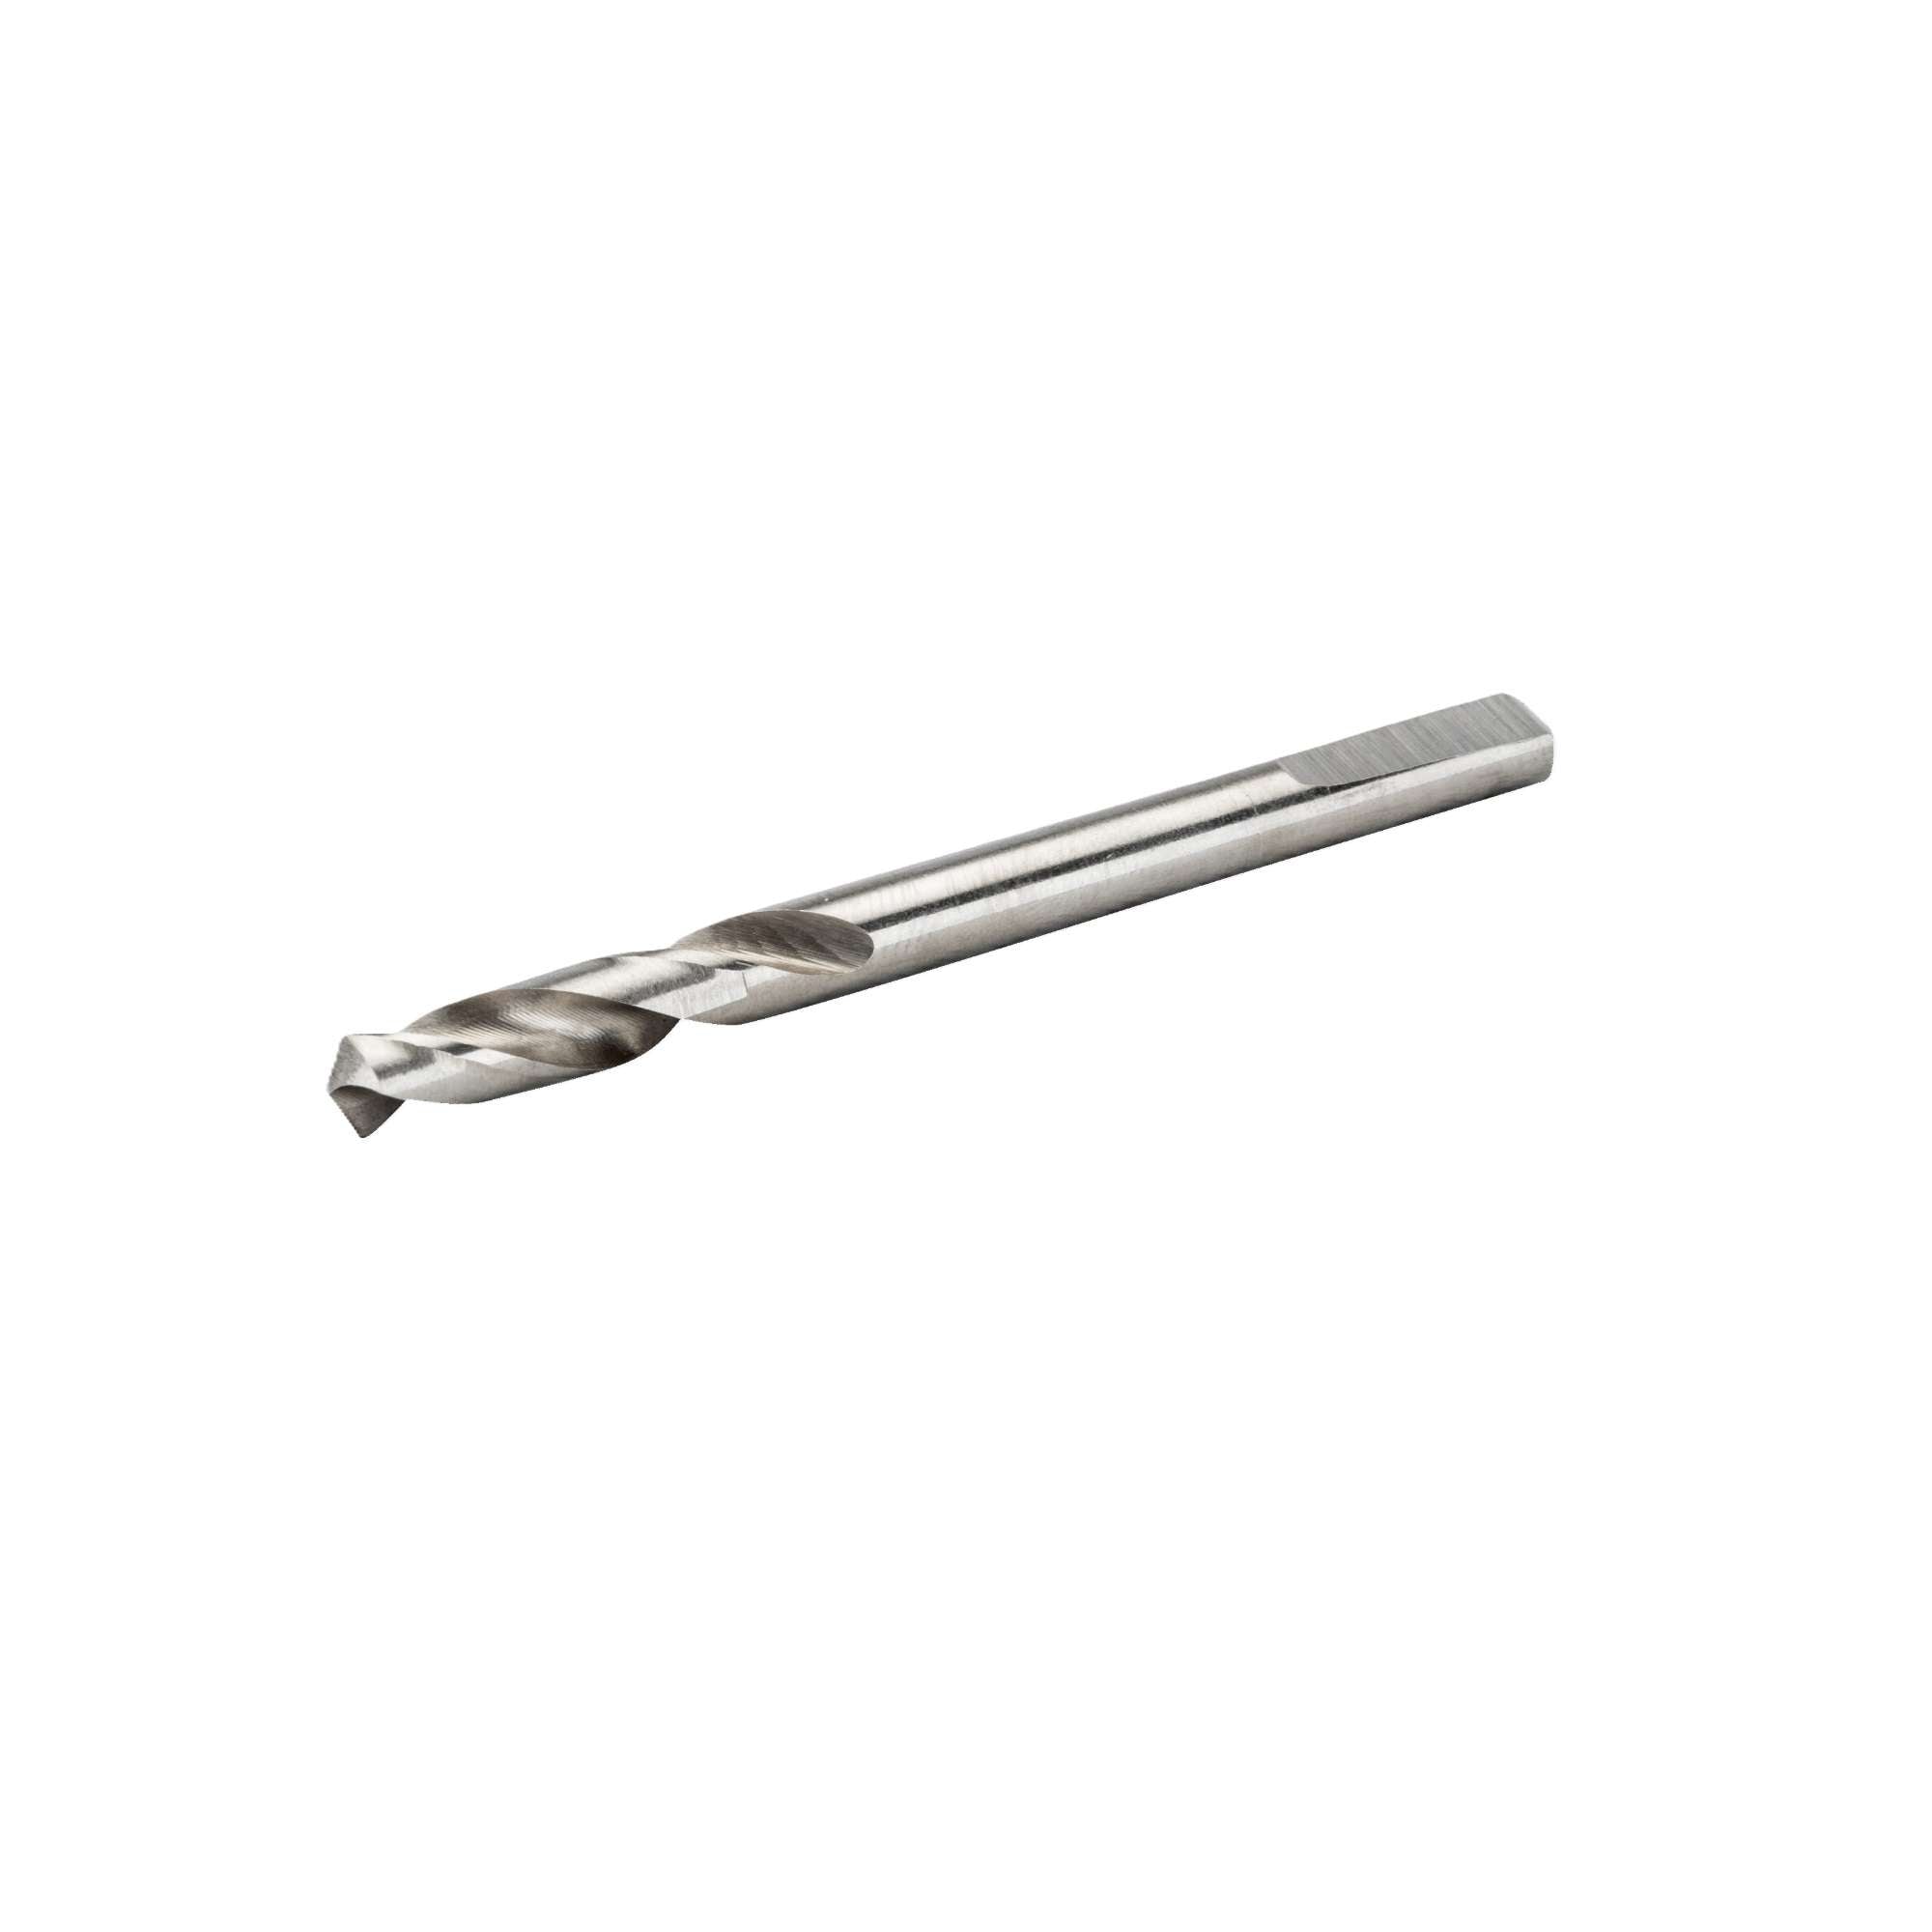 Replacement HSS Pilot Drill Bit for Shafts - Bahco 3834-DRL